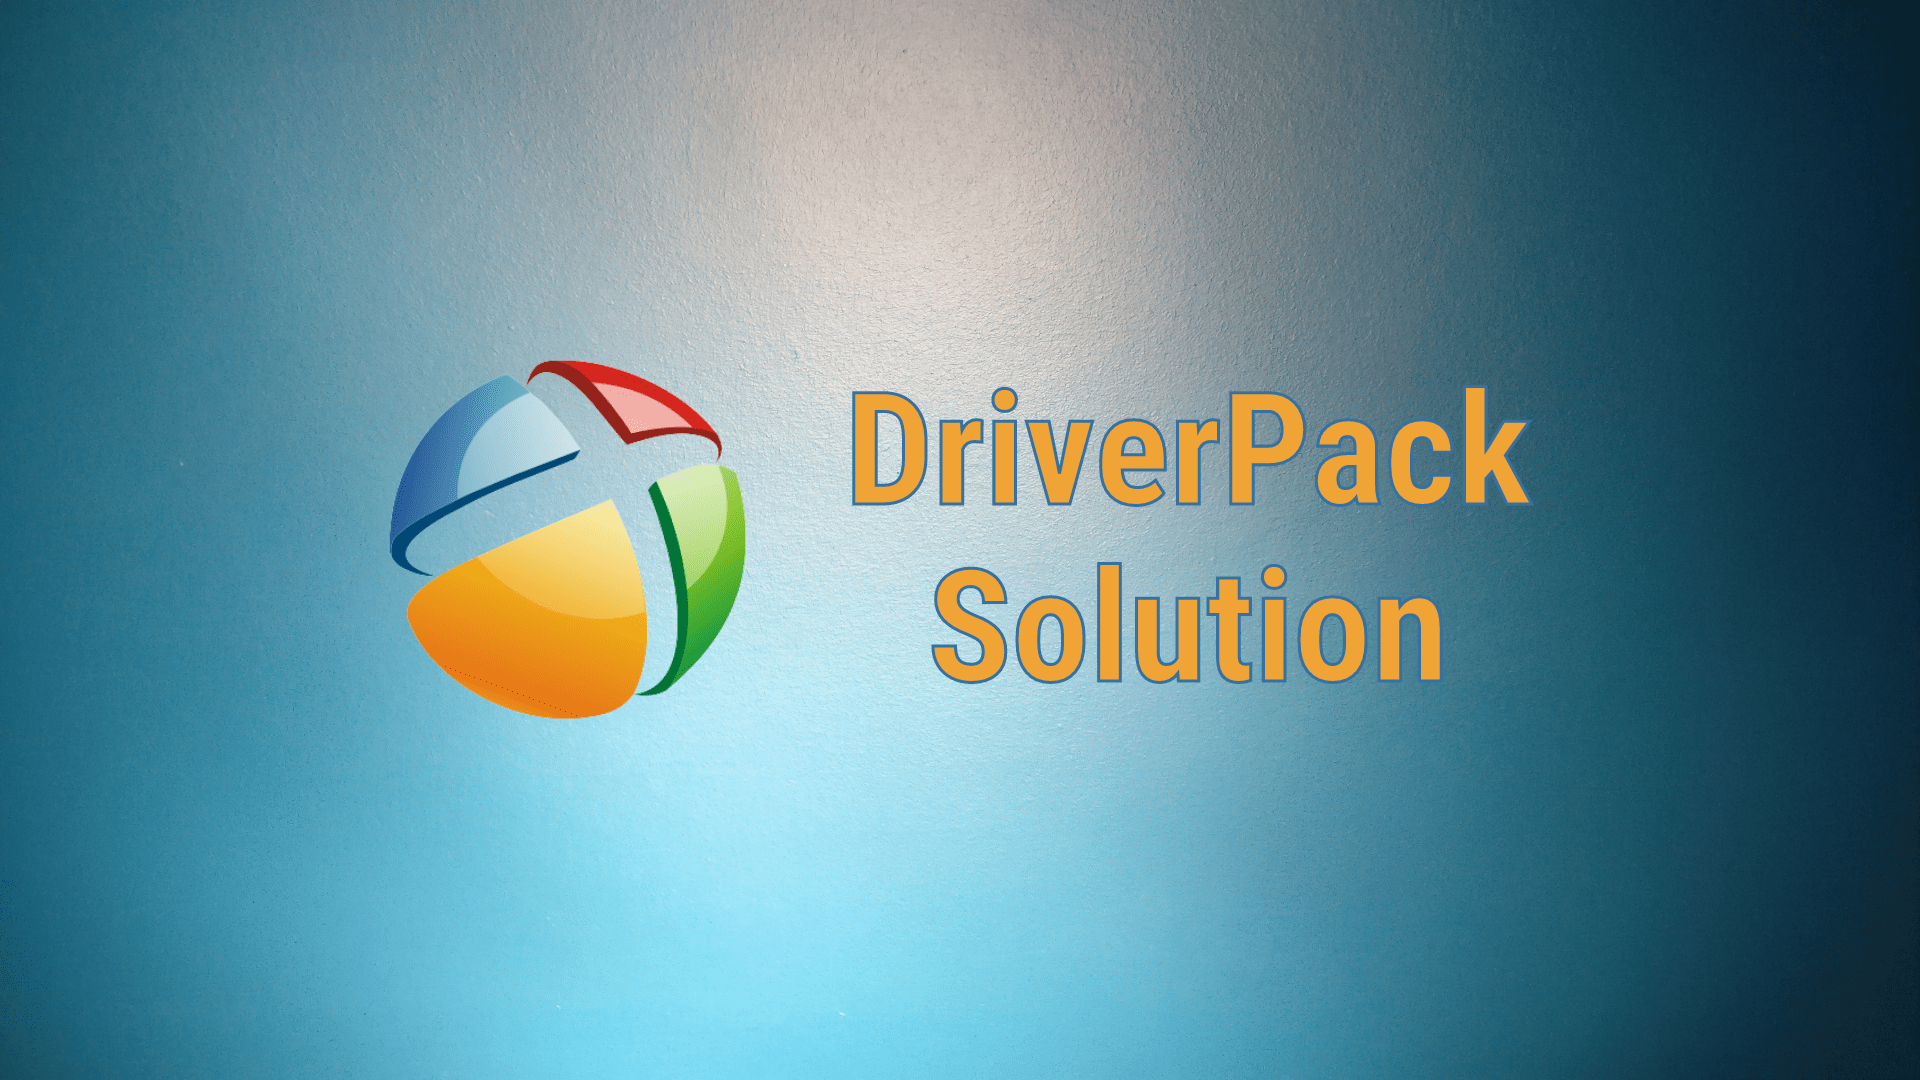 DriverPack Solution for Windows: Download, Install How to Use